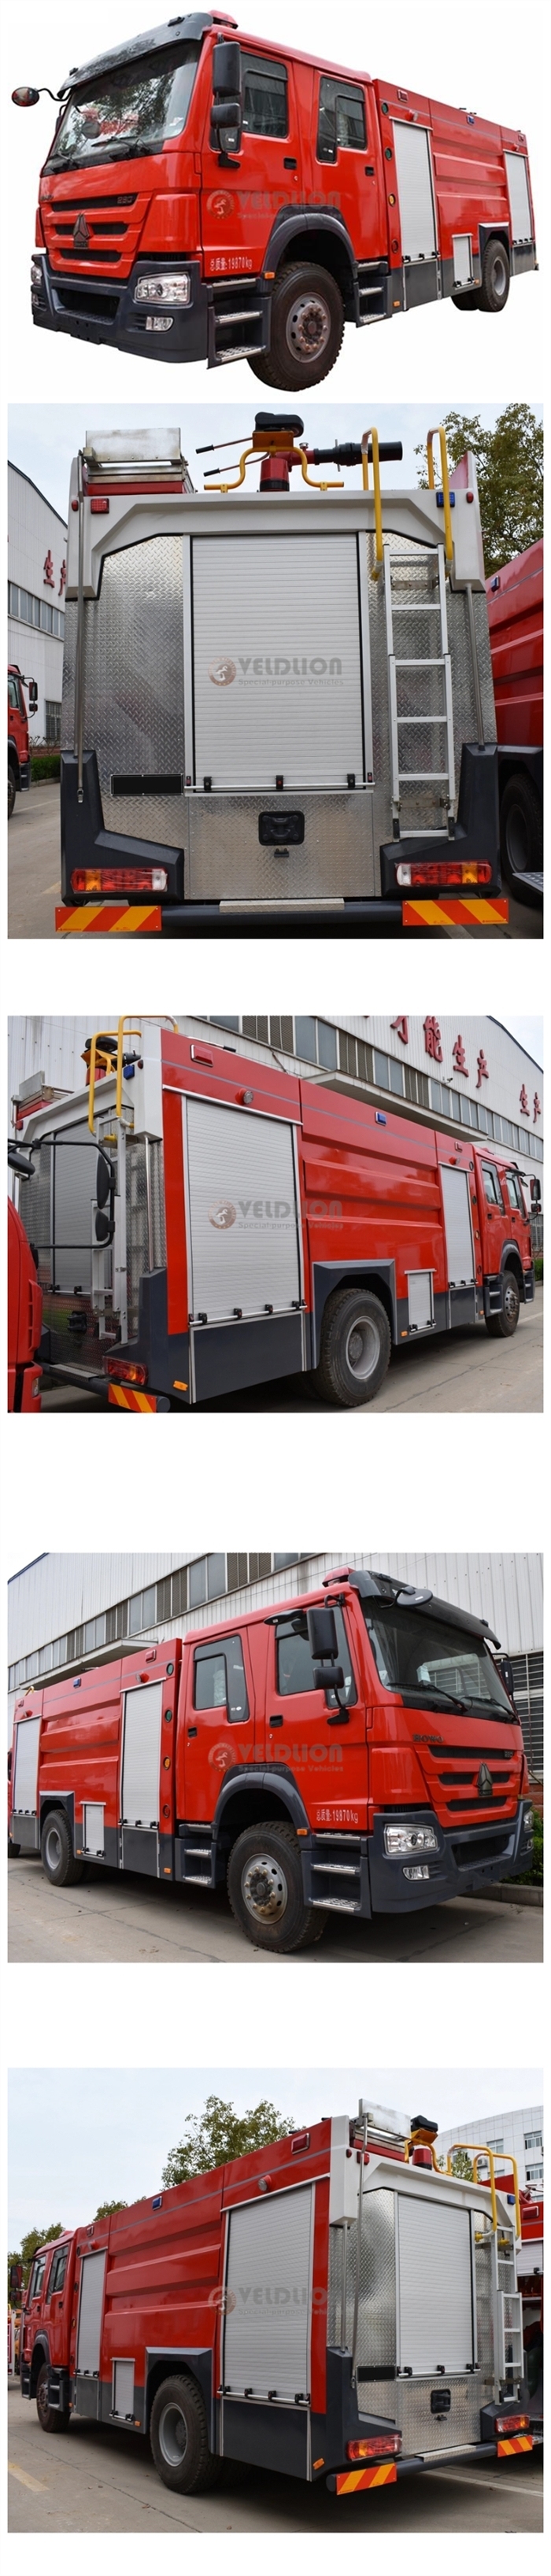 China Brand HOWO 8000 Liter/8000L/8, 000liter Water Tank Fire Fighting Truck for Sale